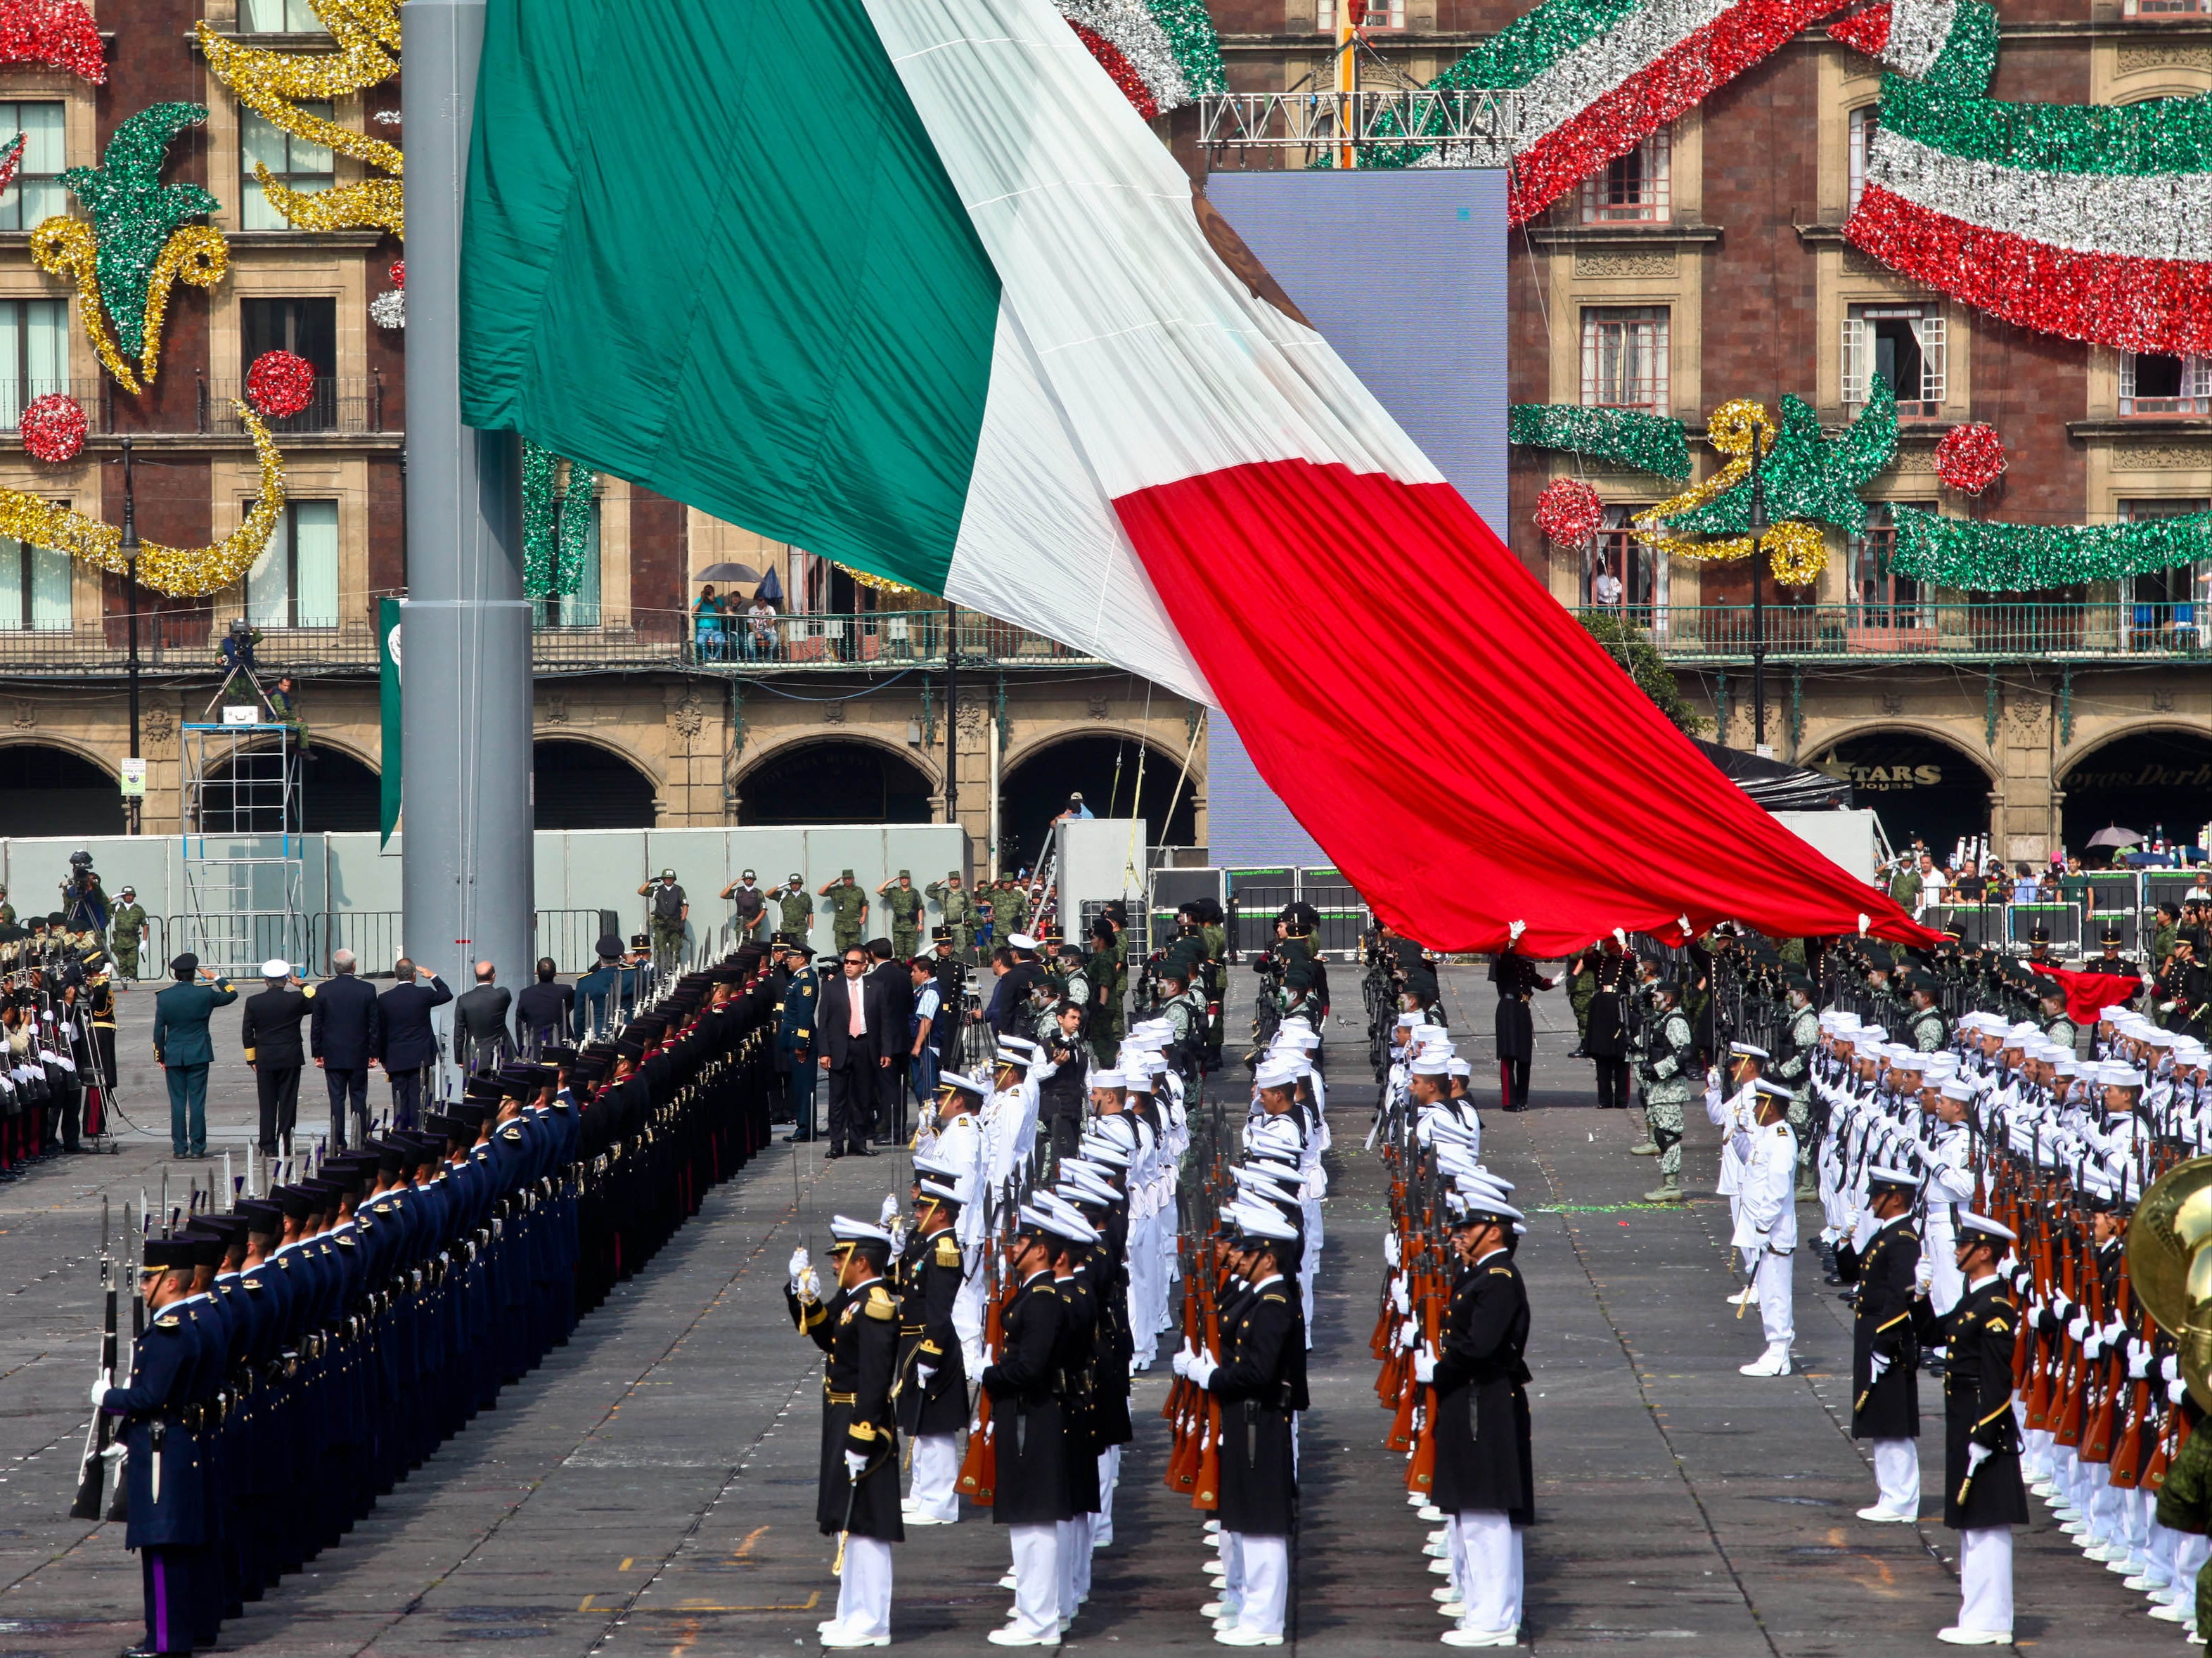 A view of Mexico’s national flag during Independence Day celebrations